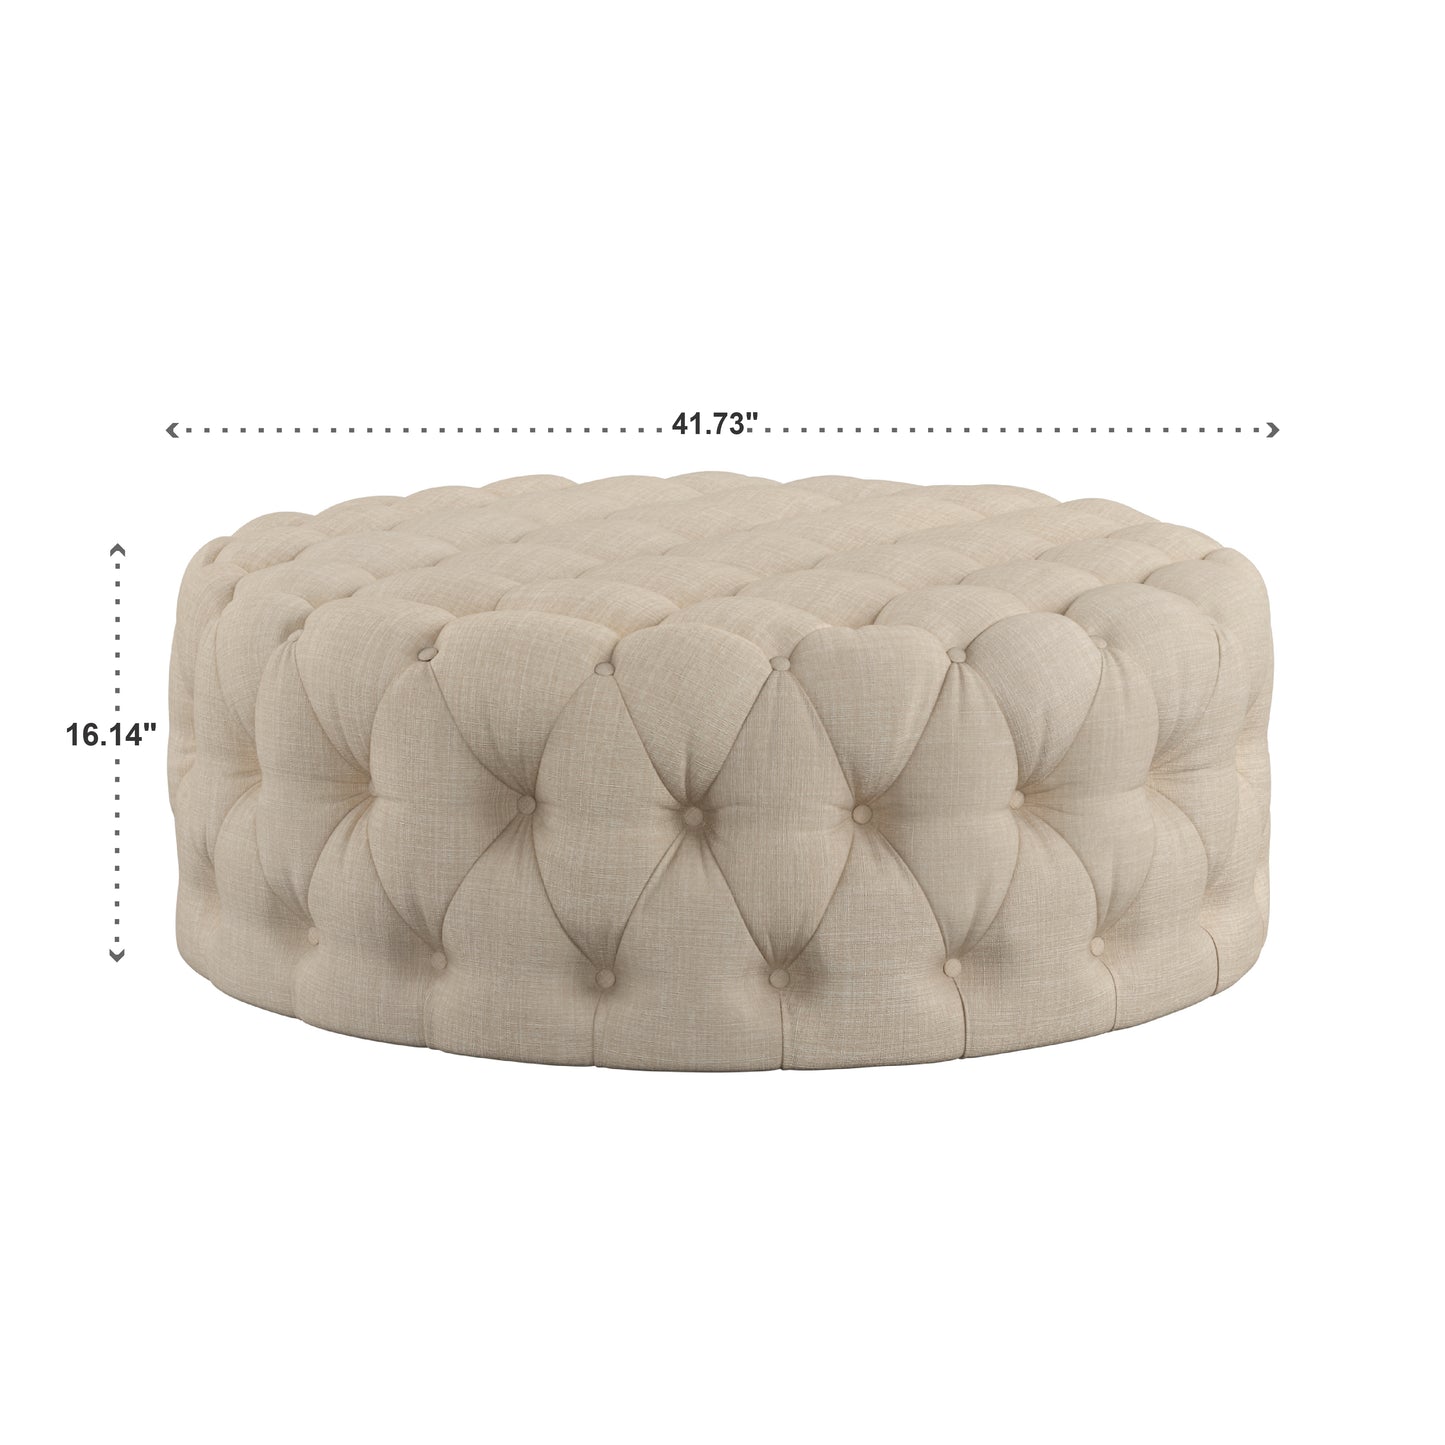 Round Tufted Ottoman with Casters - Beige Velvet